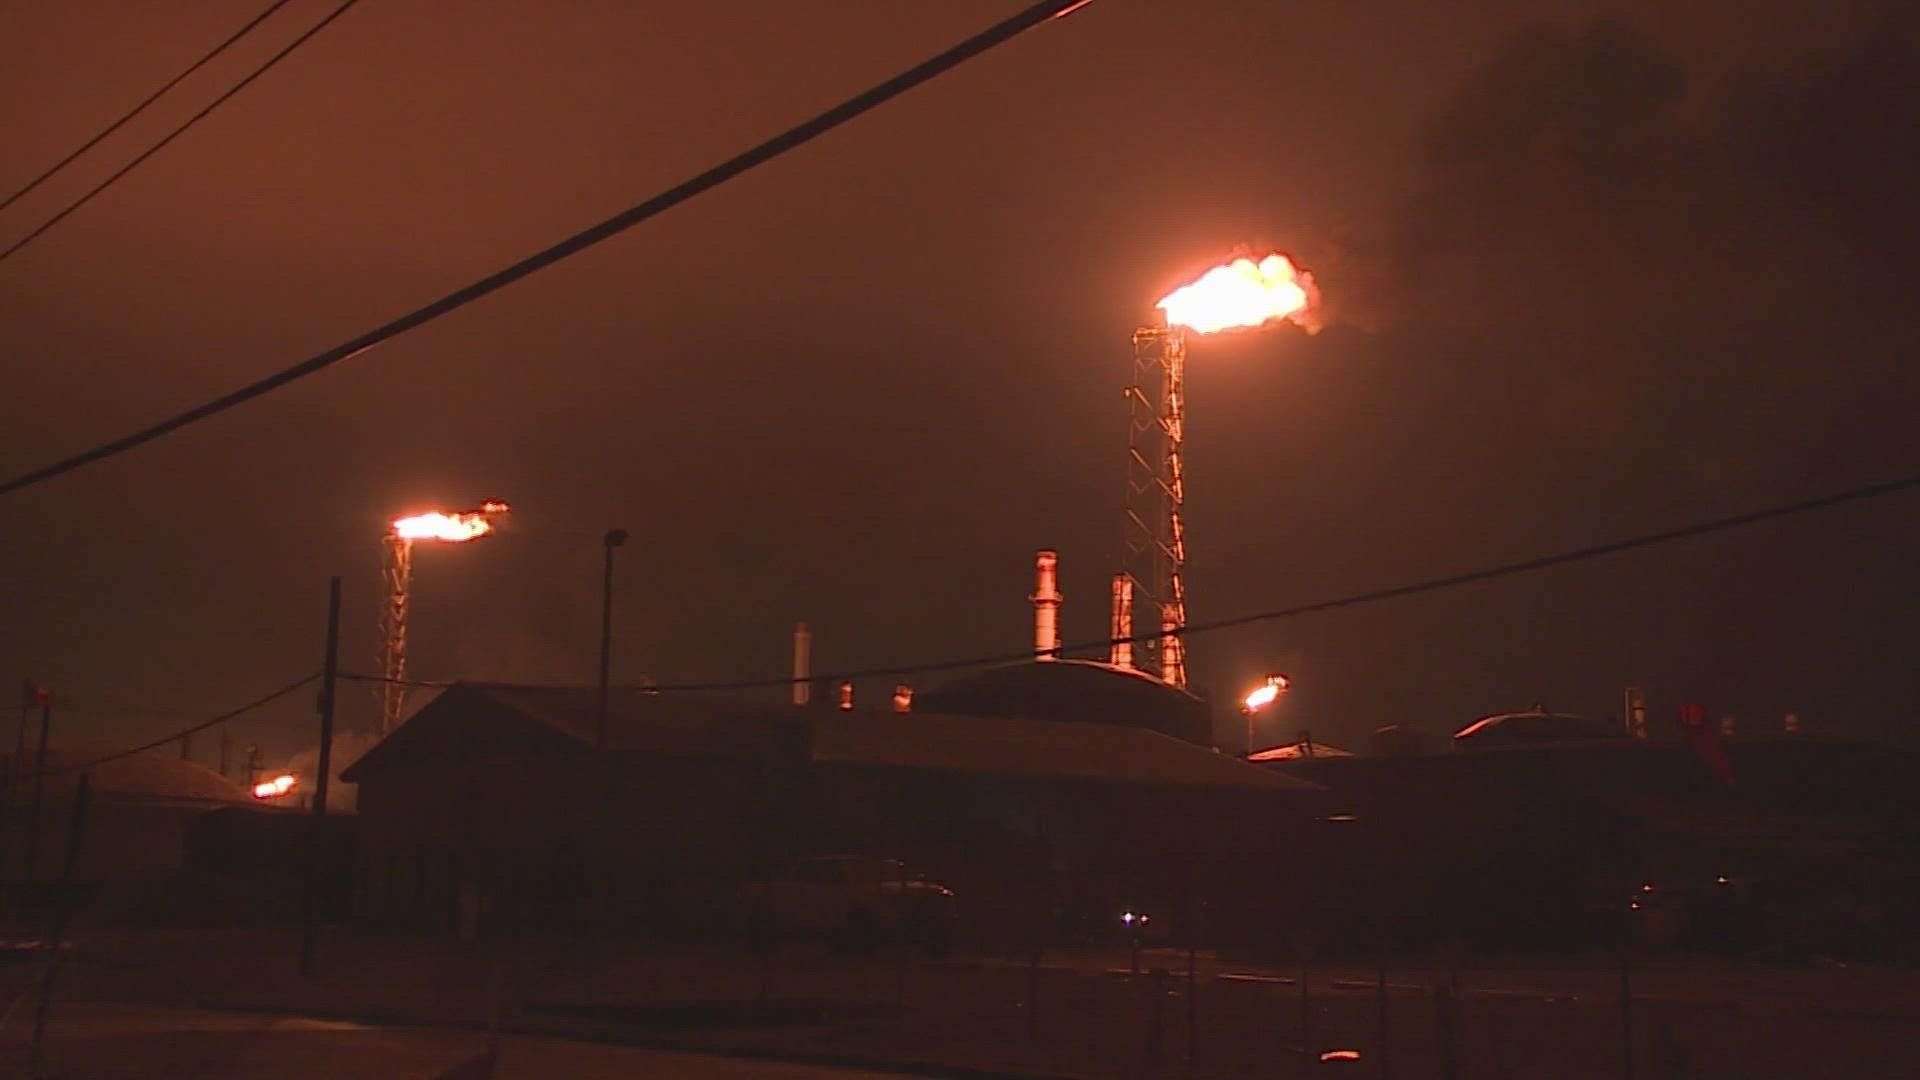 Early records shows the amount of emissions released Friday evening was one of the area's largest in the last five years.